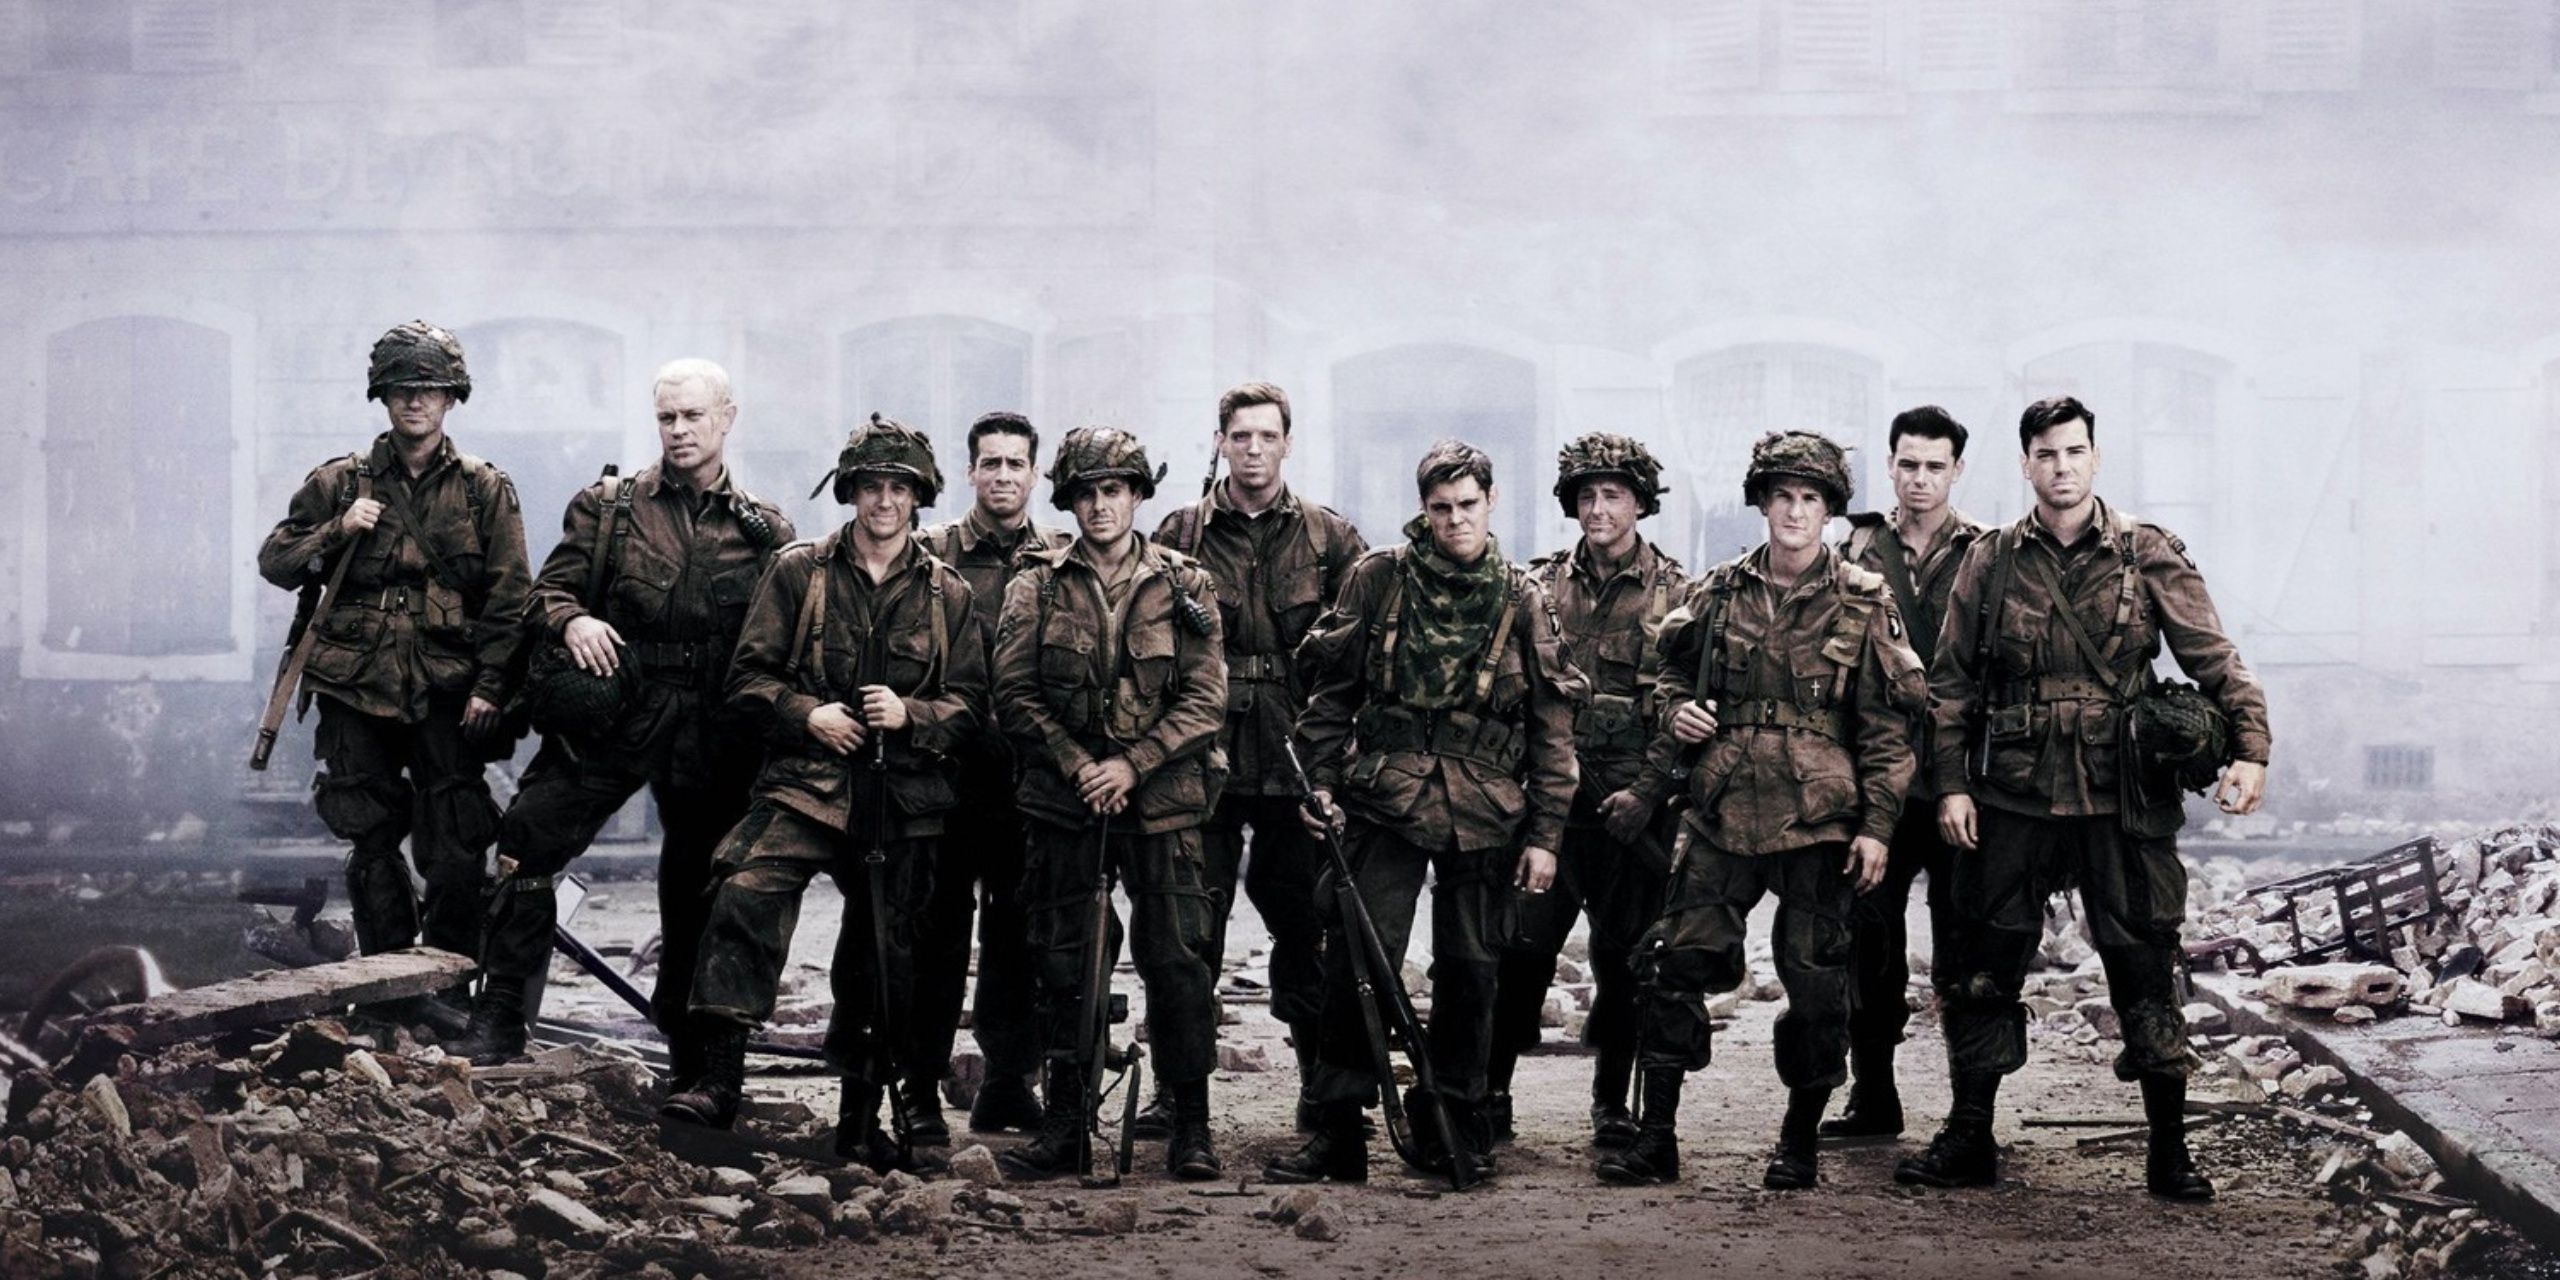 5 Band of Brothers 2001 94